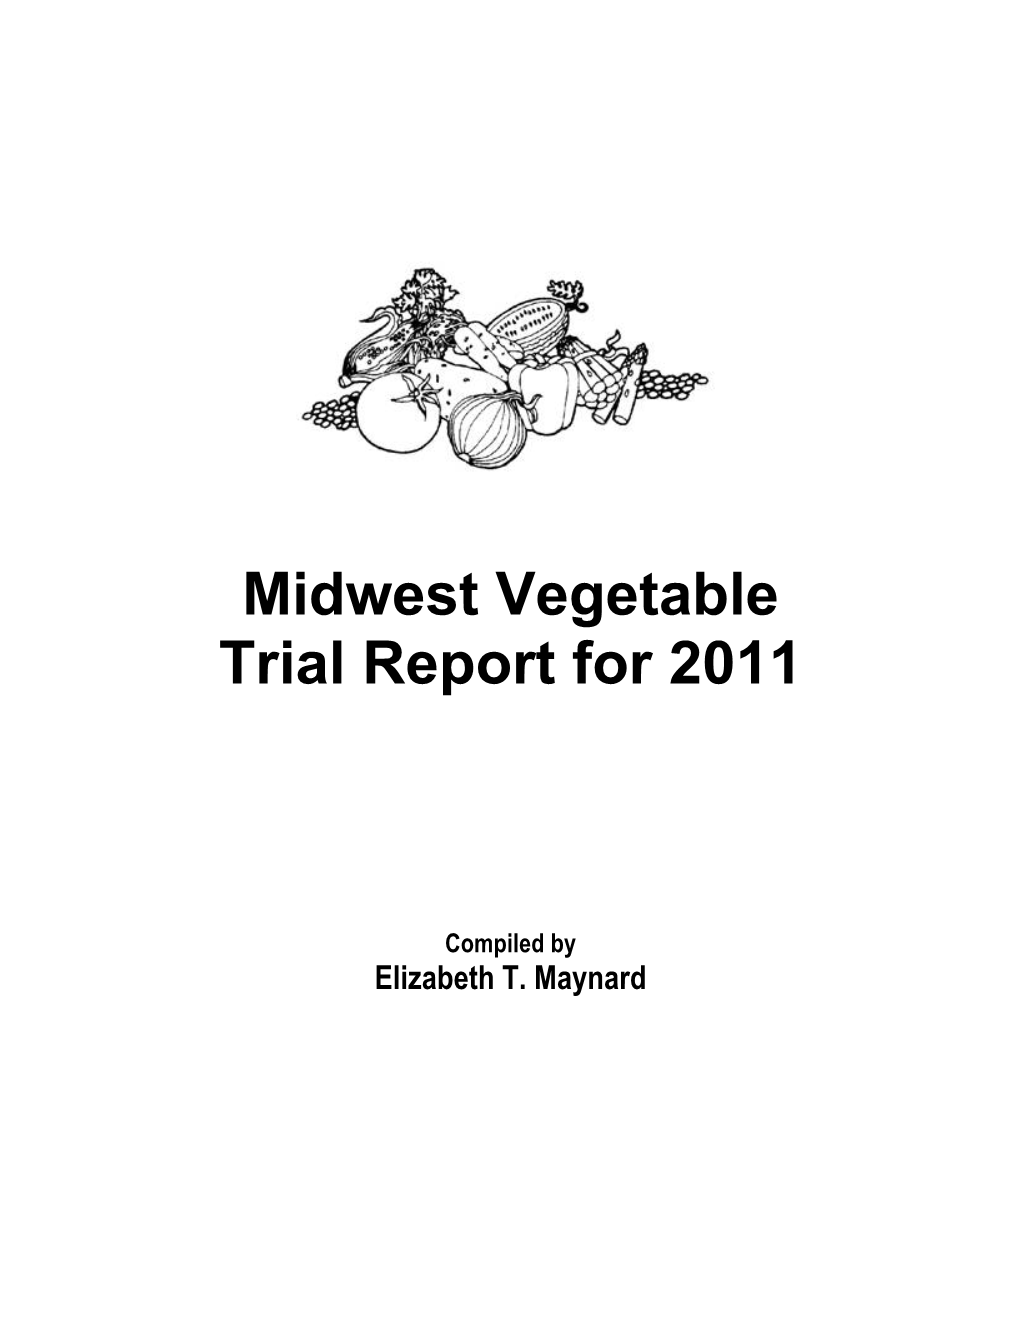 Midwest Vegetable Trial Report for 2011